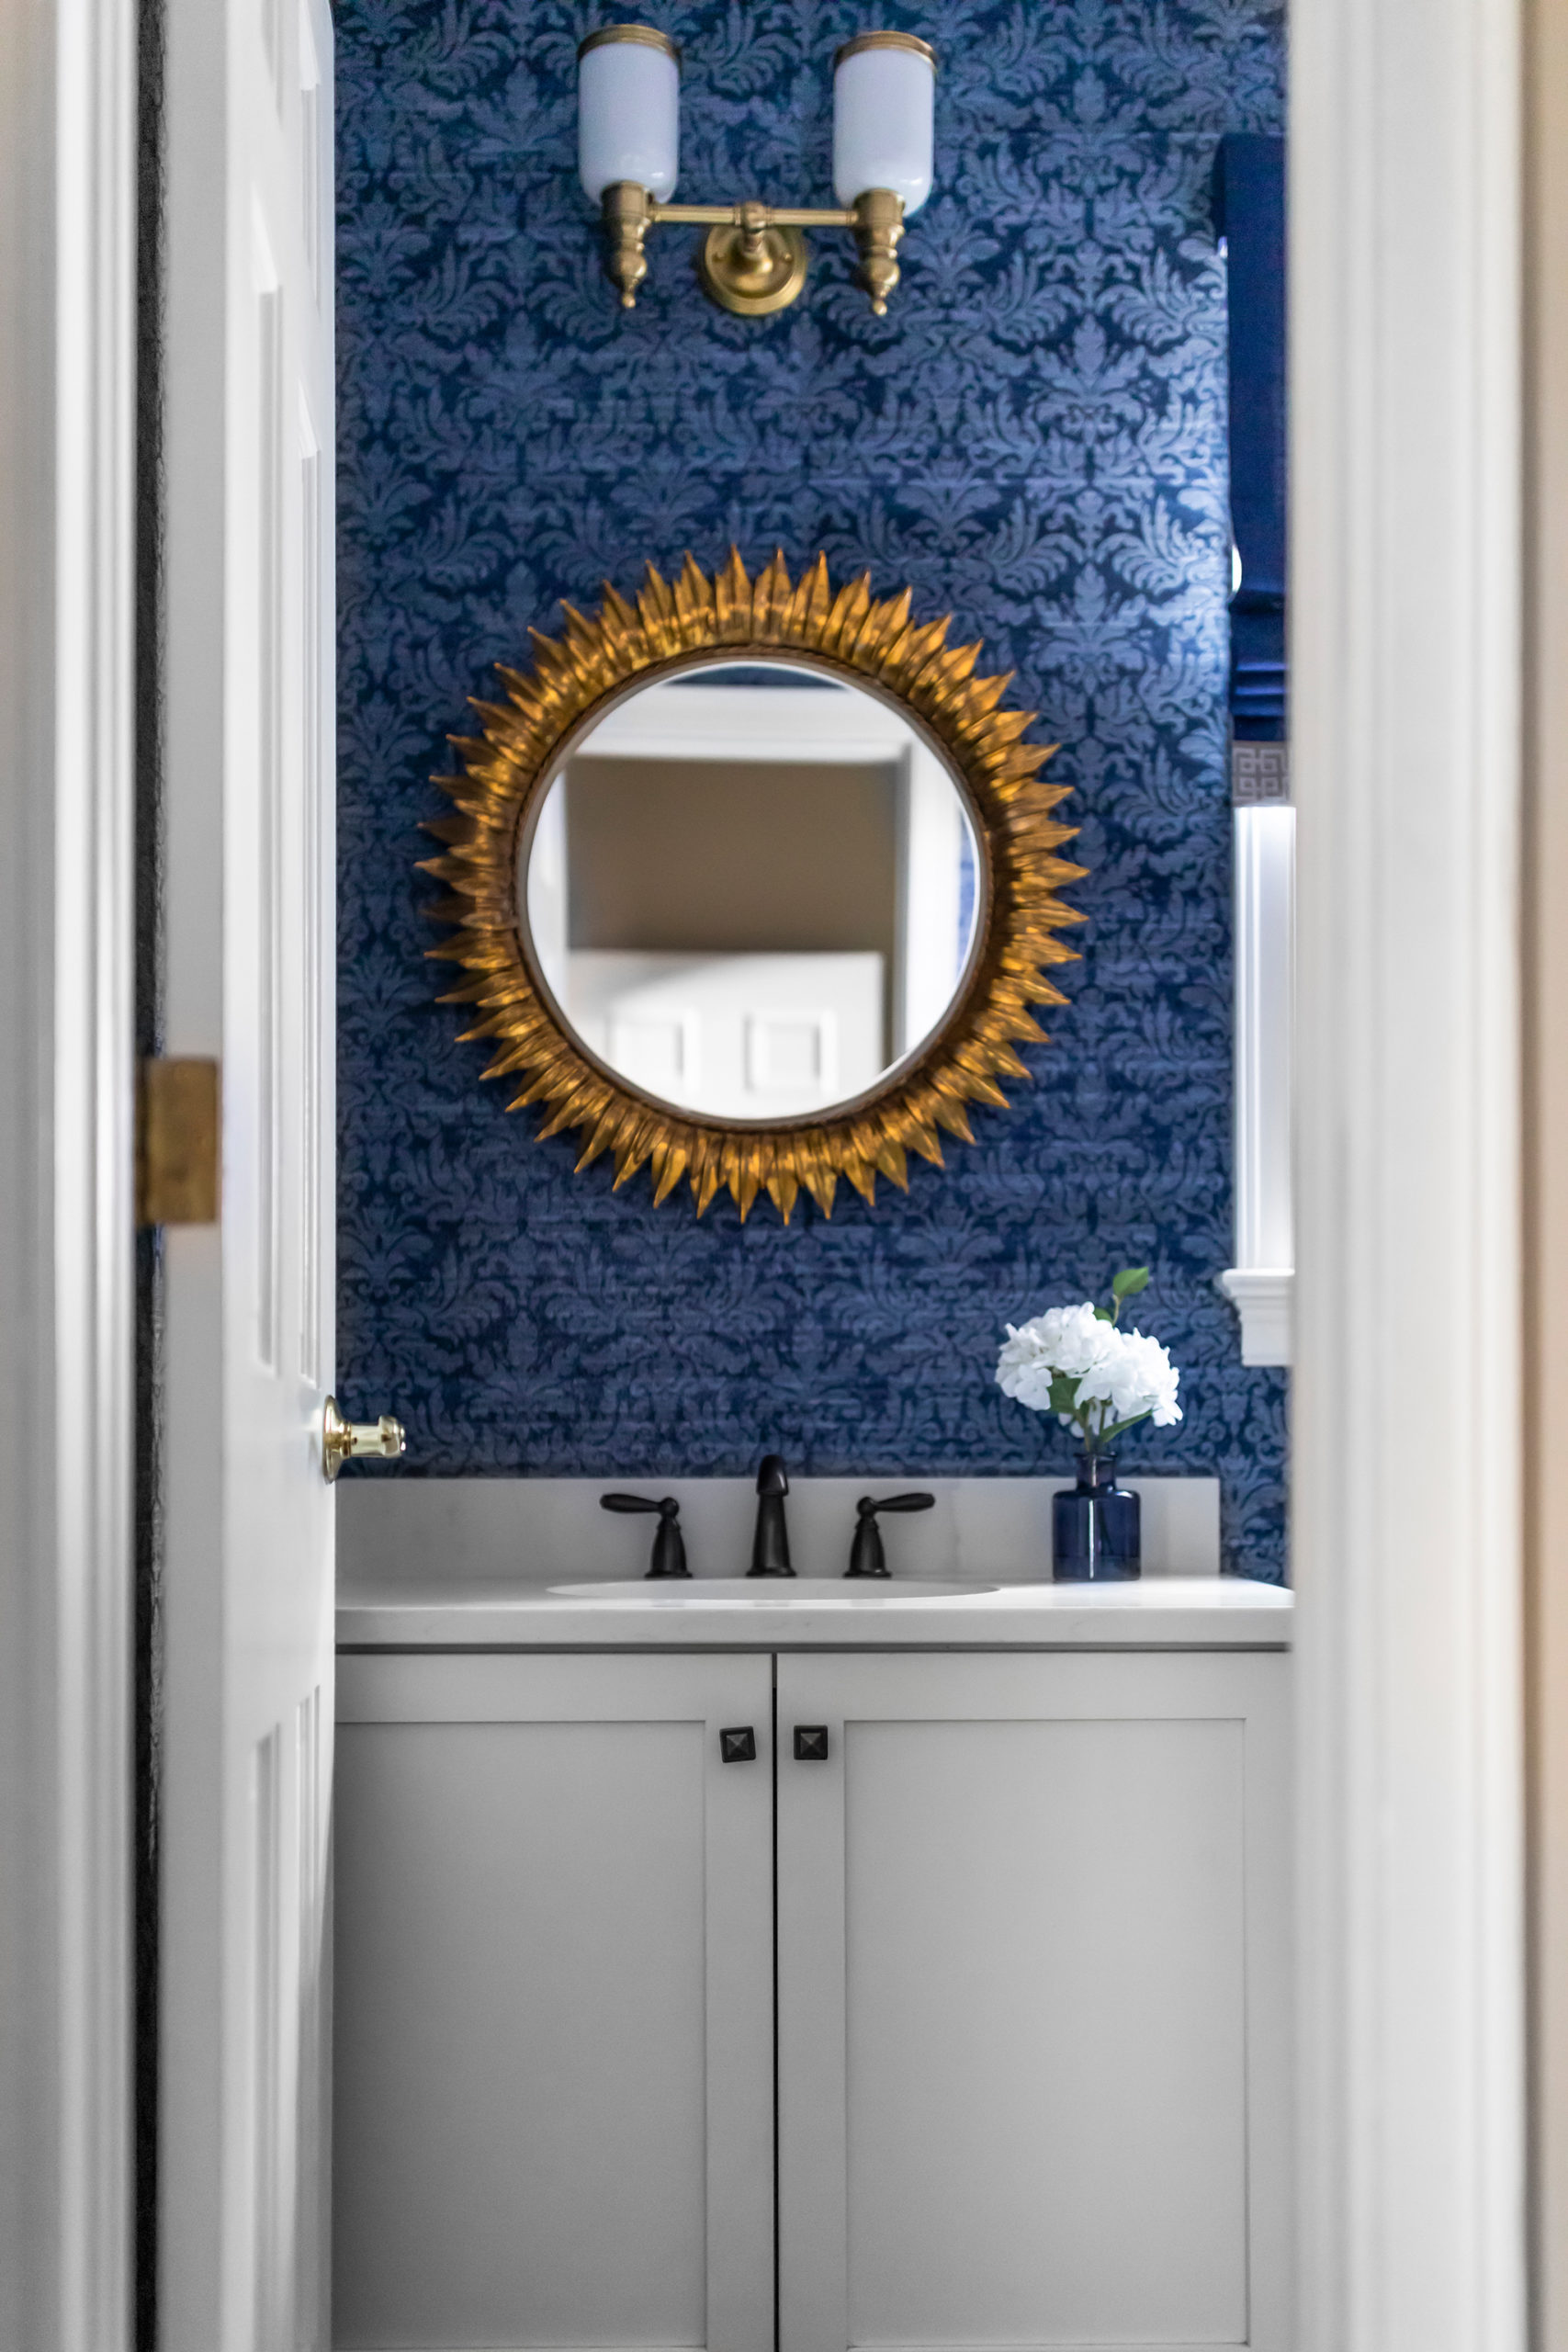 Before & After: Powder Room Edition